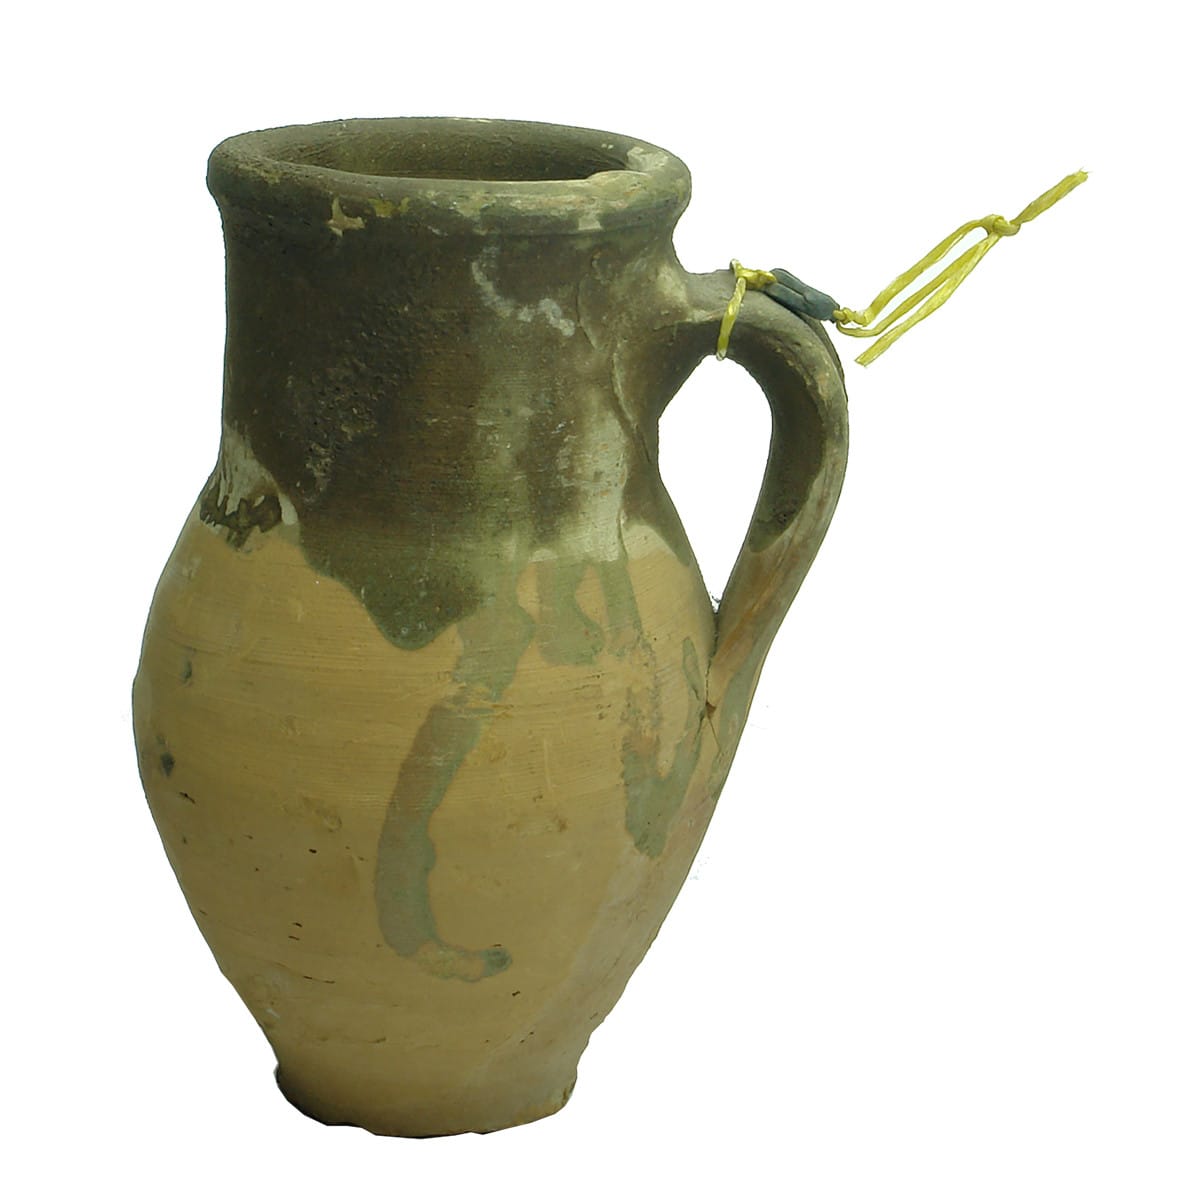 Ancient Pottery two tone mug. Attached lead stamp with AIM on both sides.